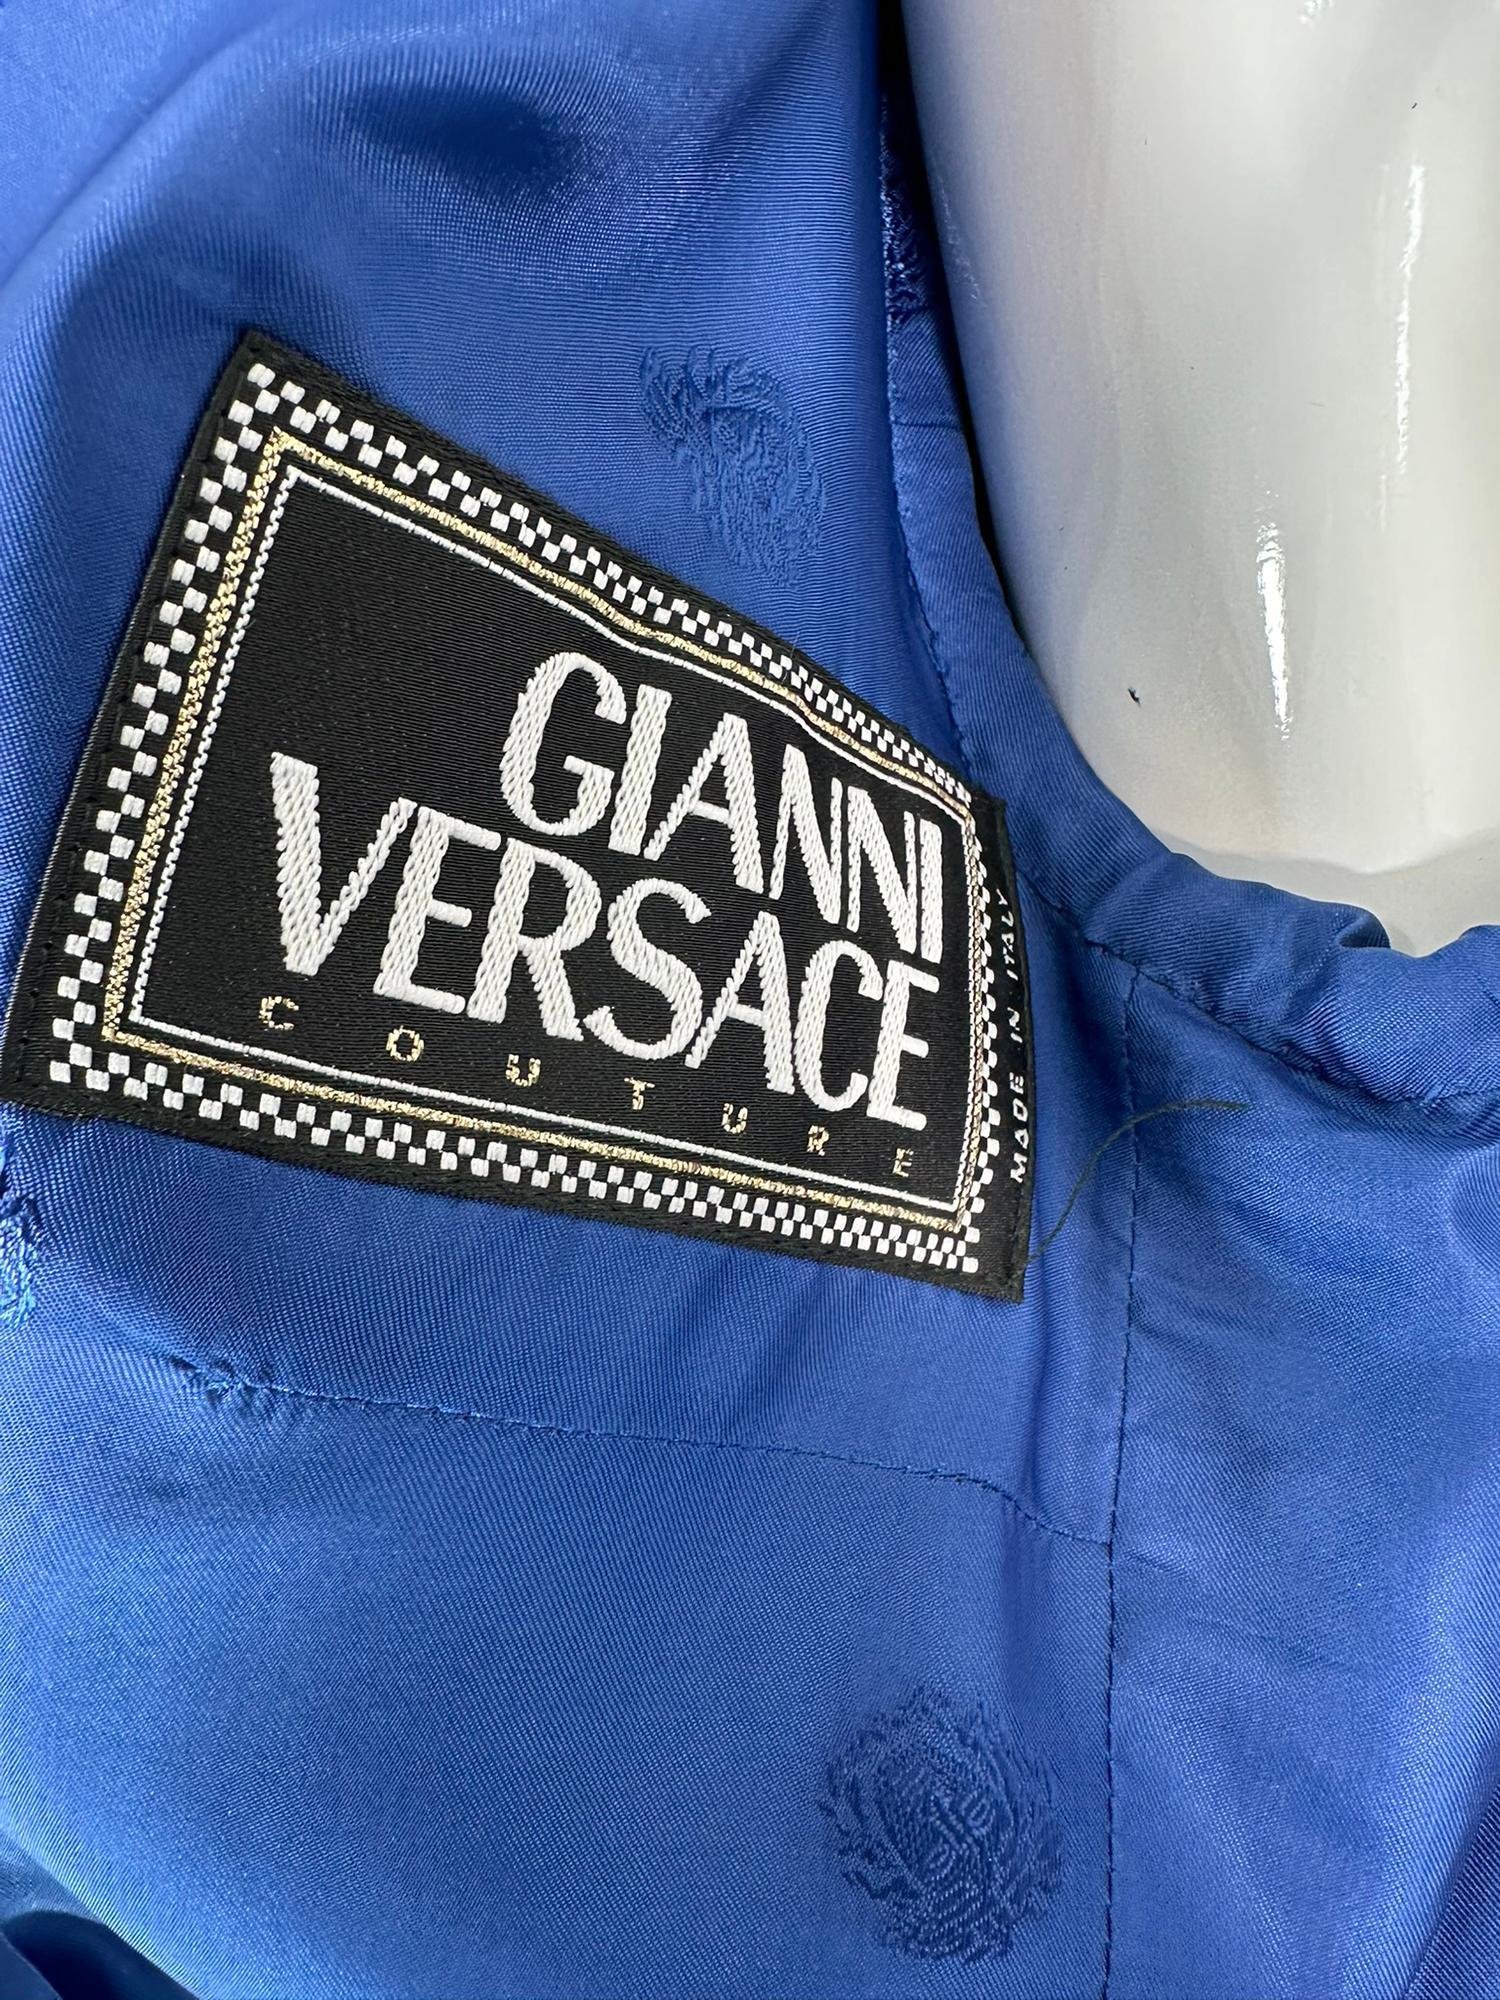 Gianni Versace Couture F/W 1995 Royal Blue Wool Pant Suit  For Sale 10